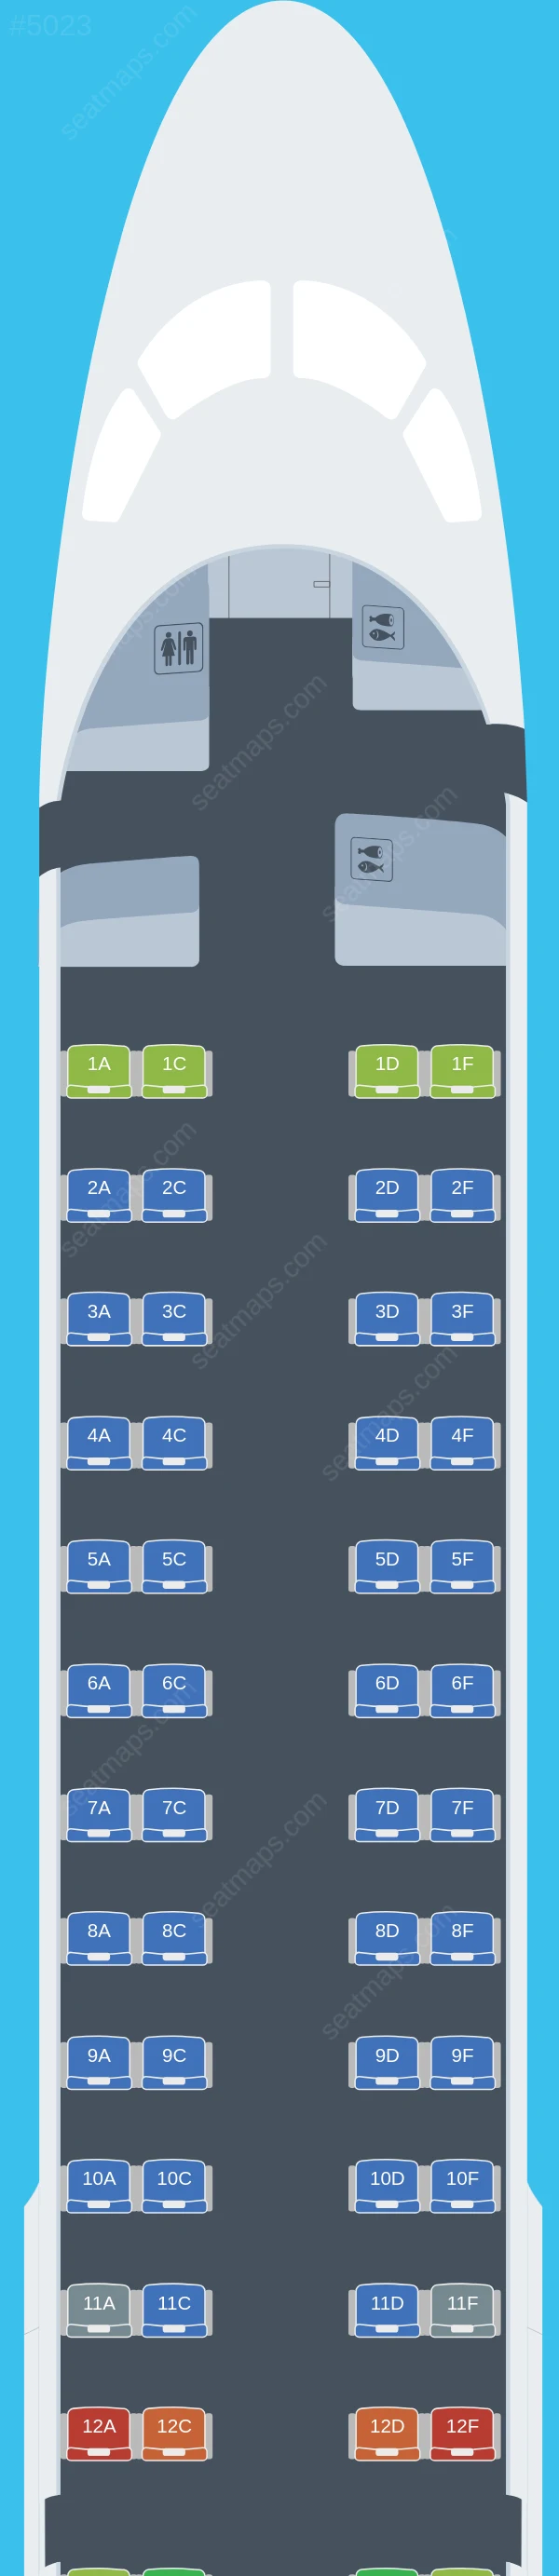 Helvetic Airways Embraer E190 seatmap preview